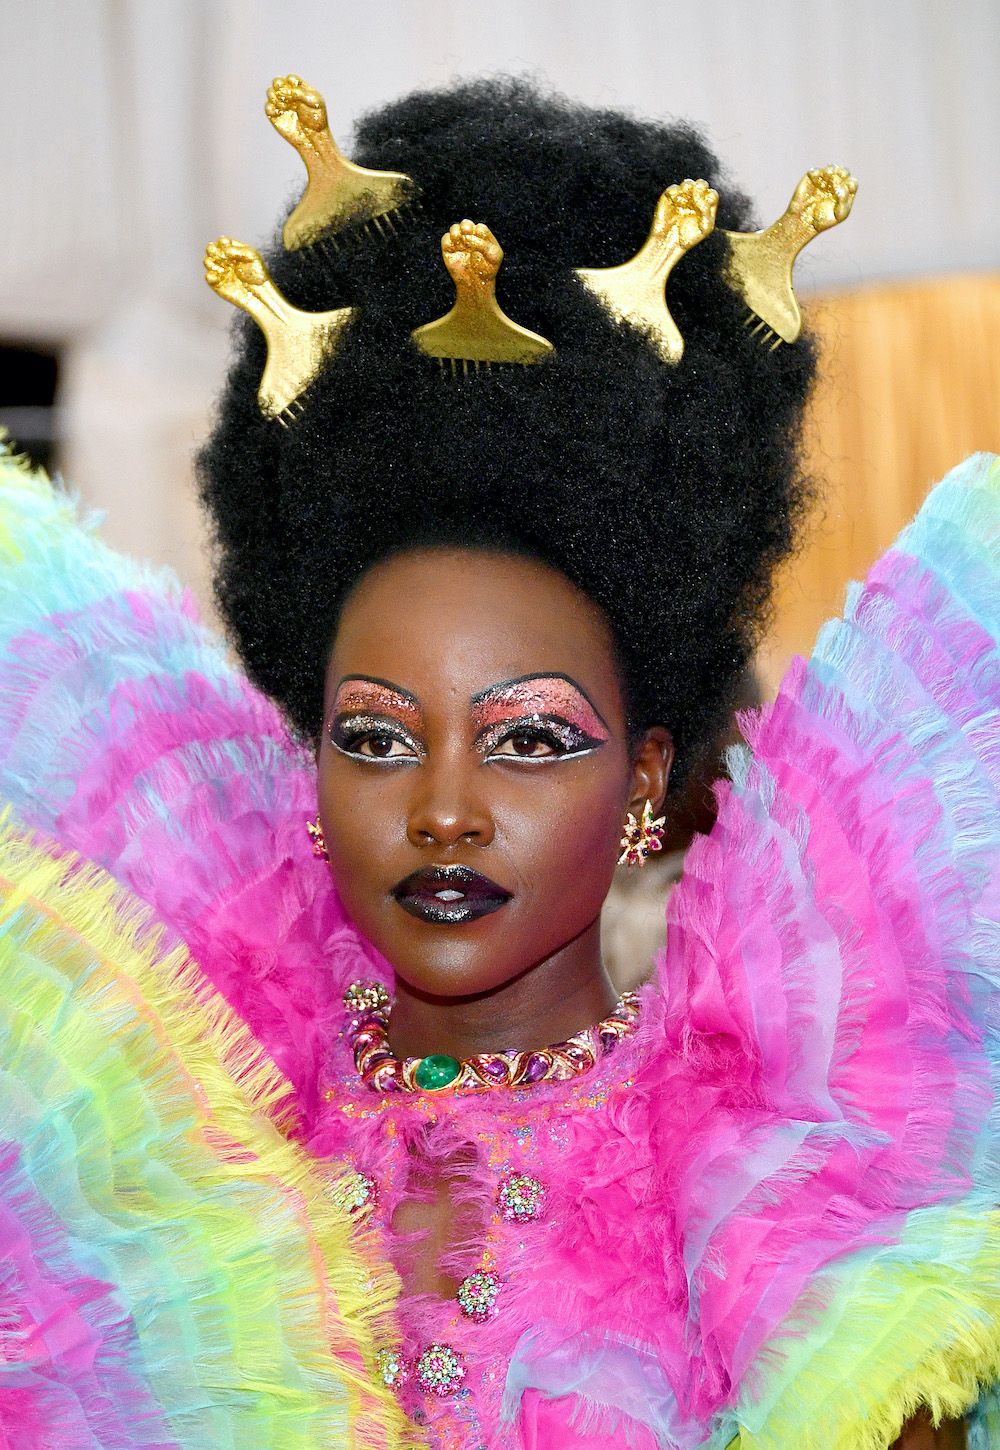 <p>                     This look on Lupita Nyong'o is such a memorable make-up look from the Met Gala red carpet, worn to the 2019 event, featuring dark glossy lips and layers of glitter taken all the way up to her brows. It's proof that at this event, more is definitely more.                   </p>